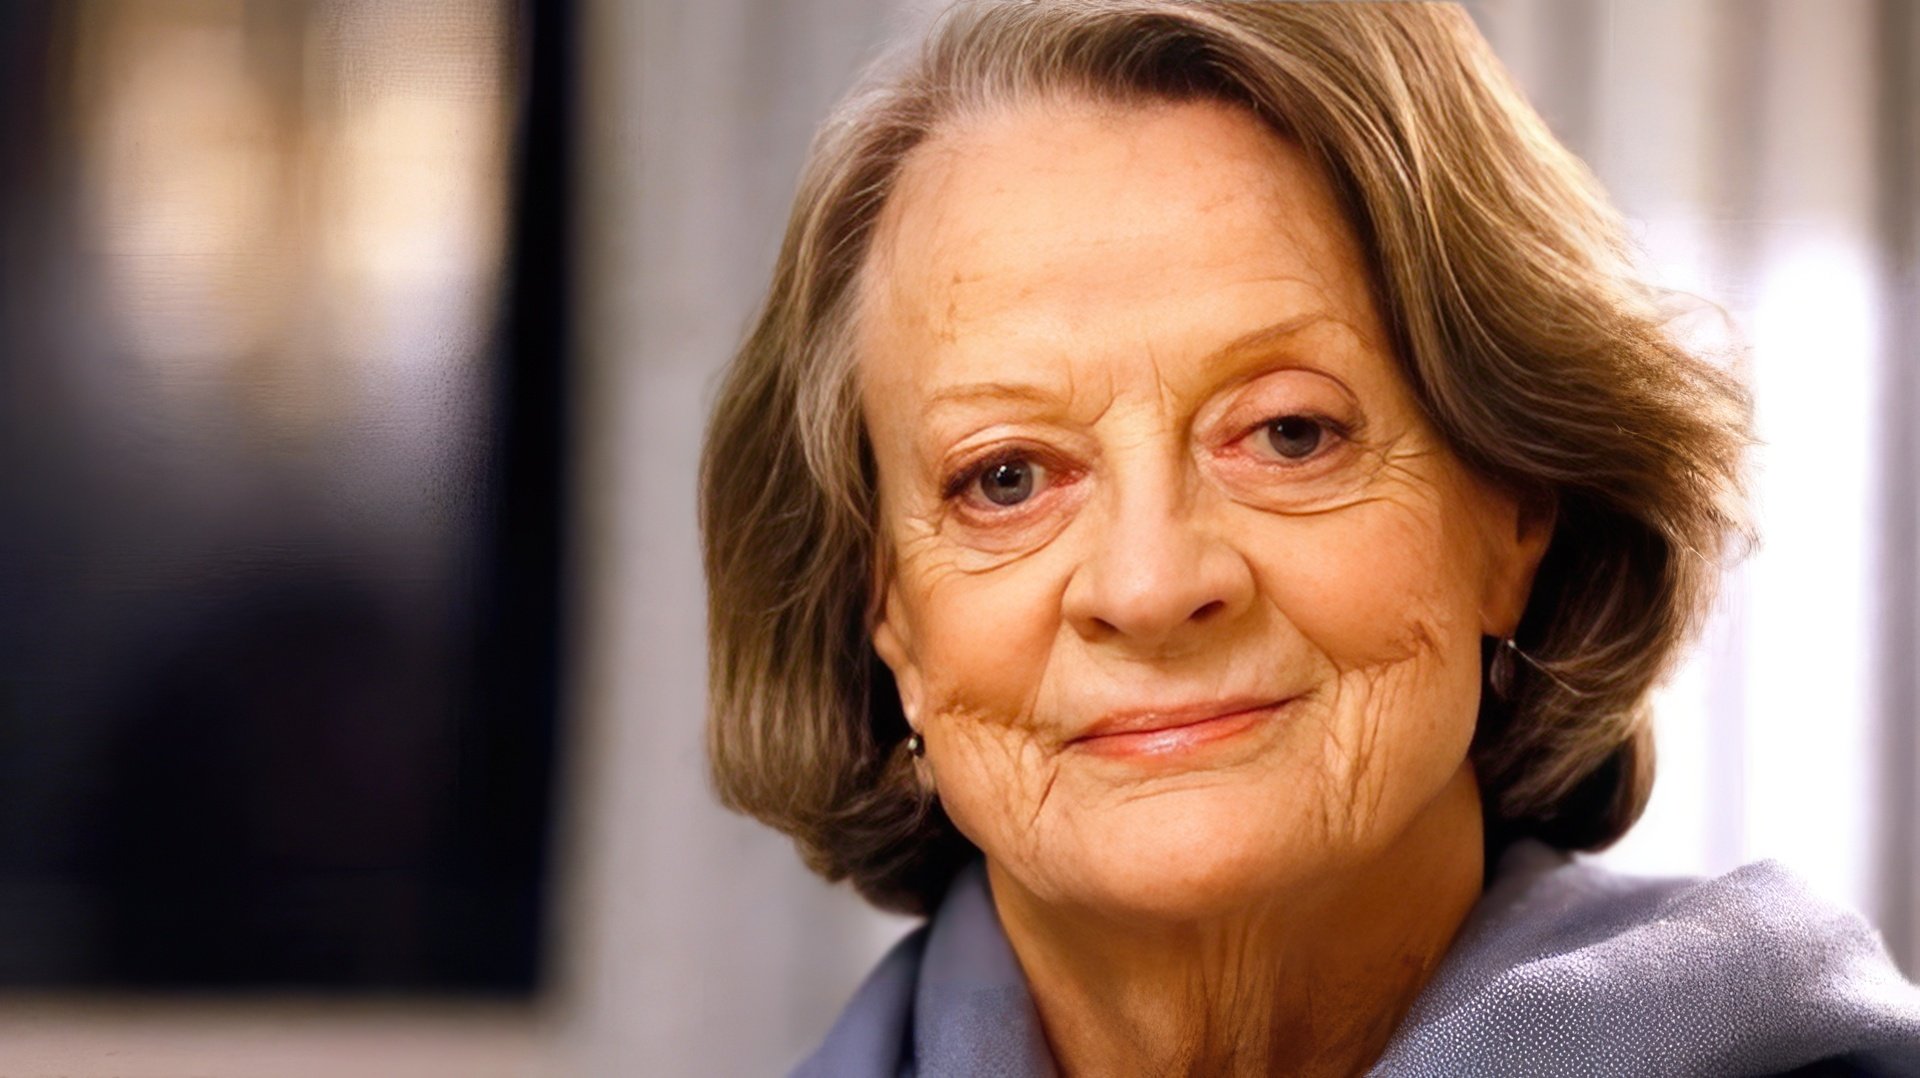 Maggie Smith now